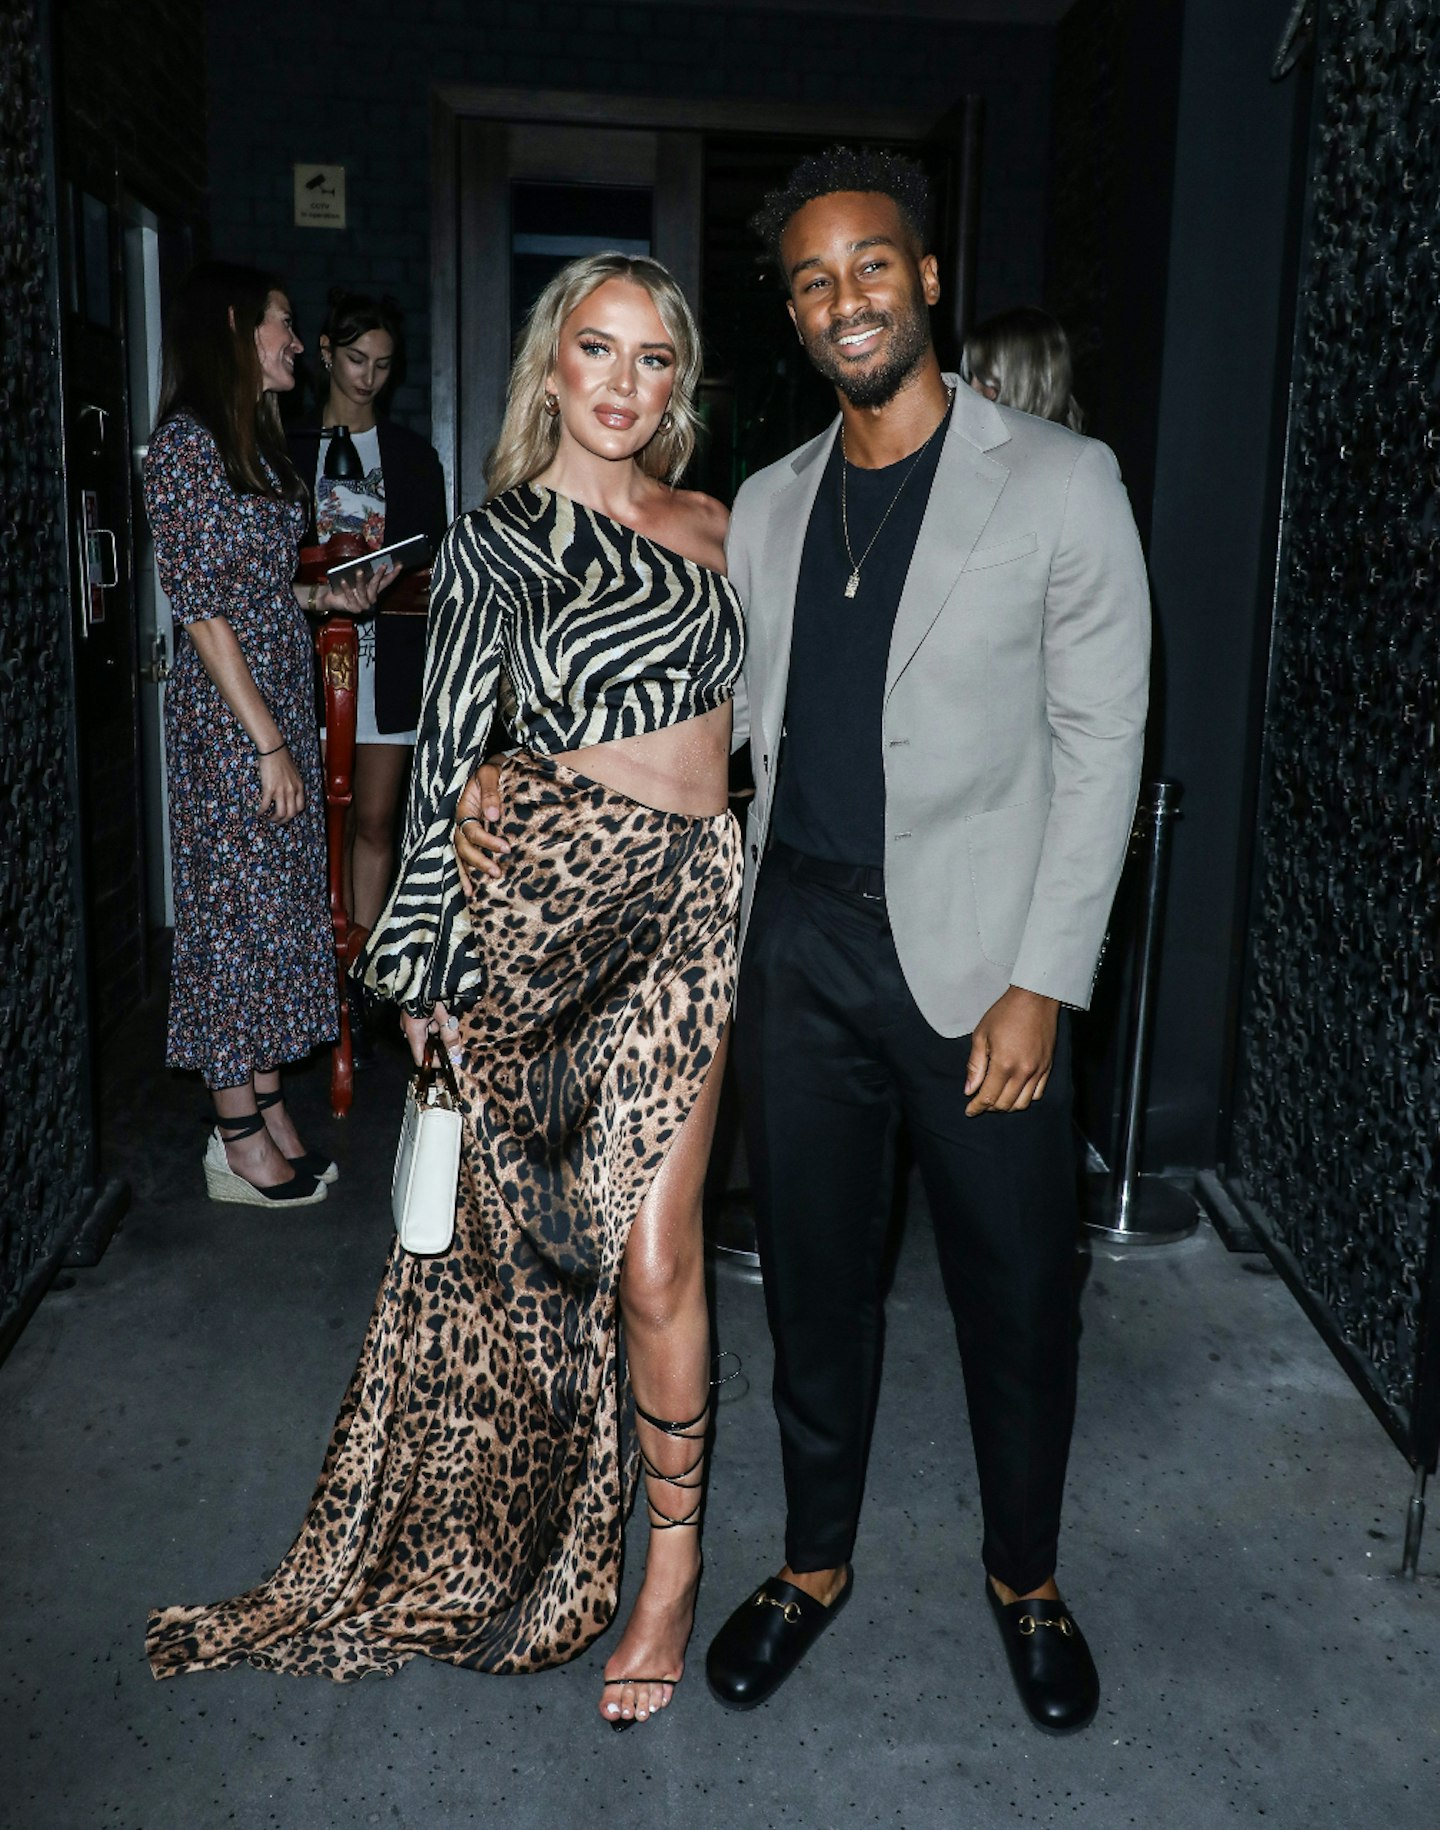 Faye Winter and Teddy Soares outside the ITV Summer Party 2022